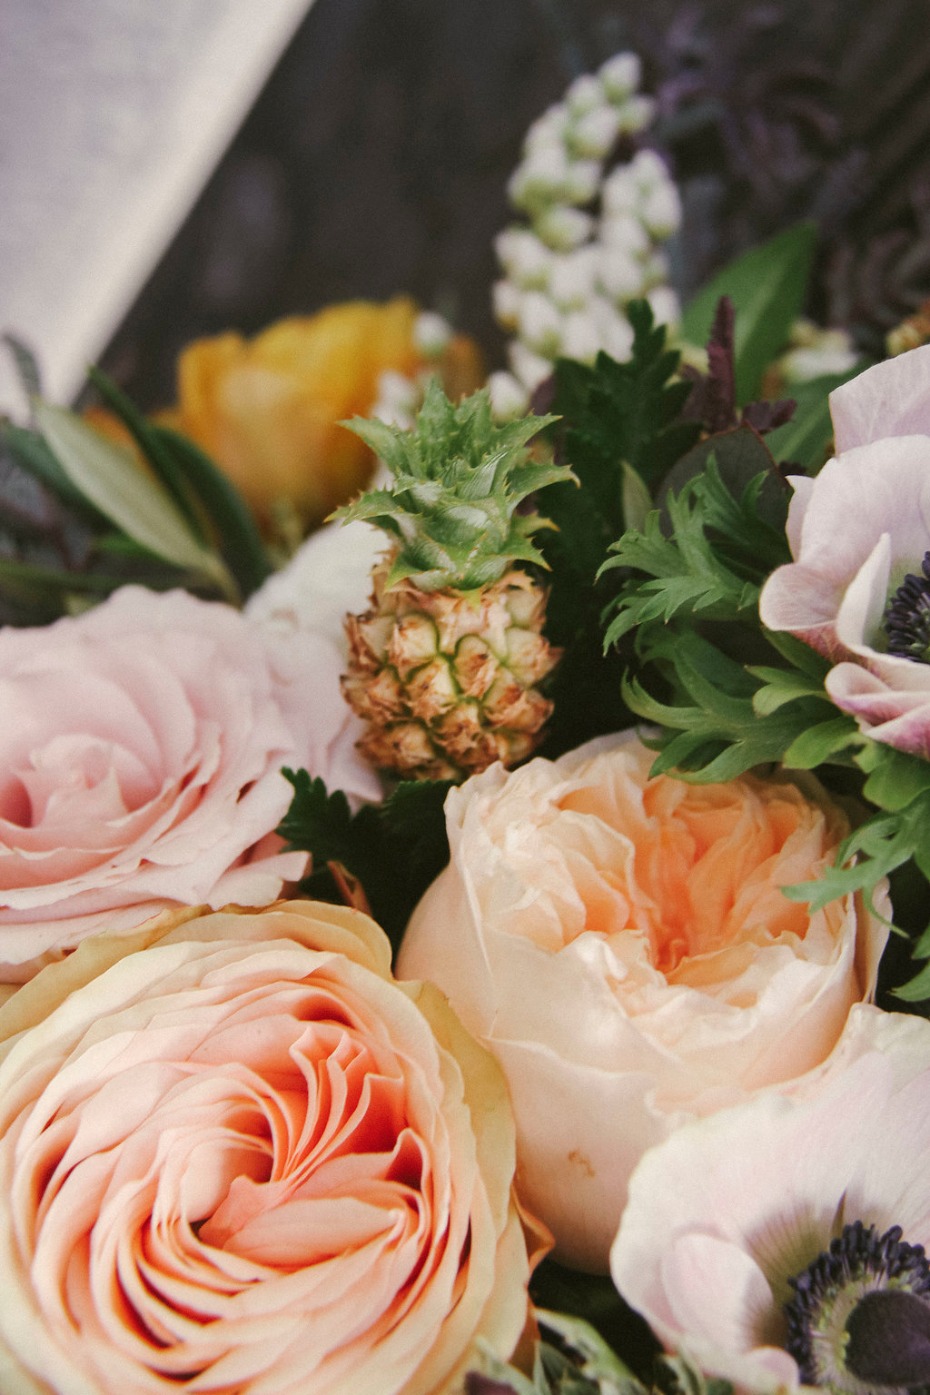 The tiniest pineapple for your bouquet!